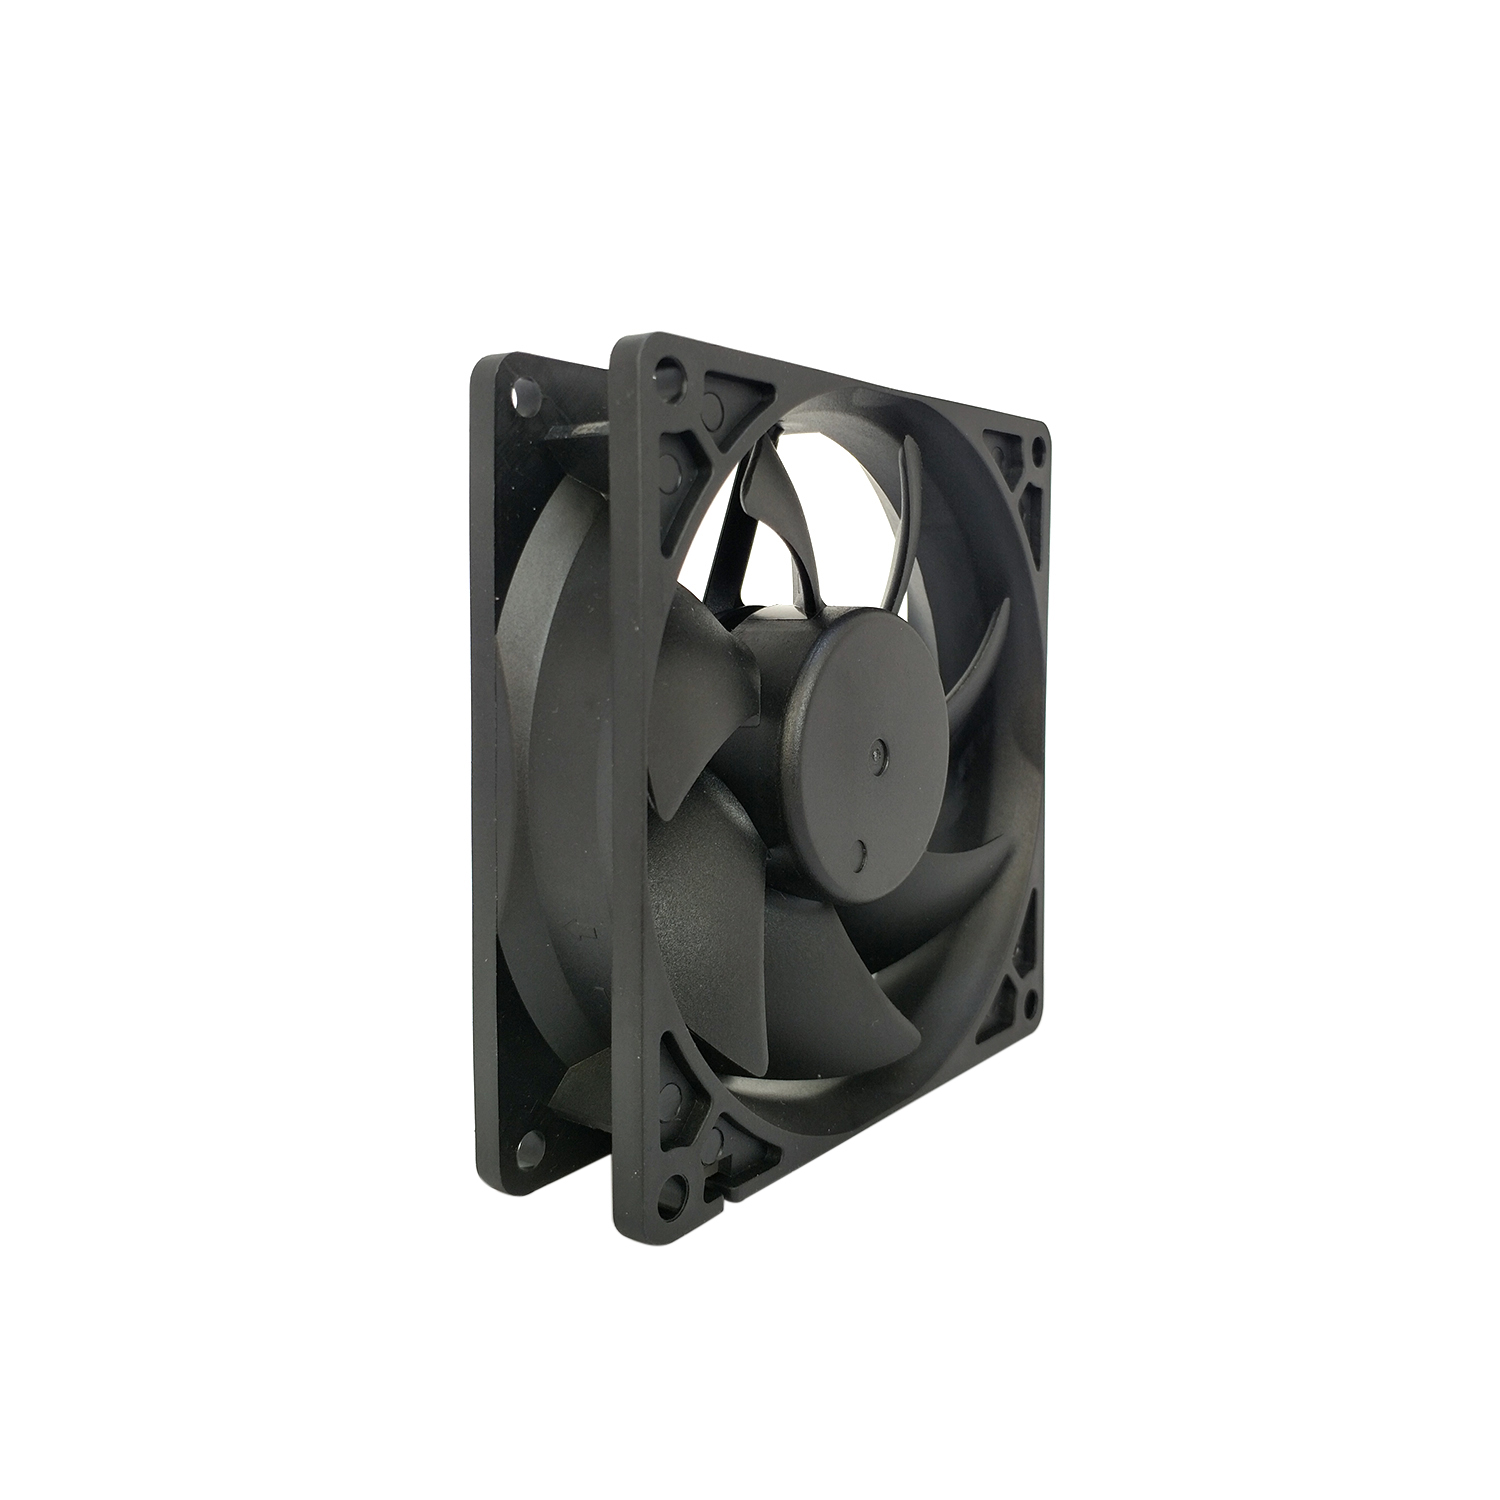 DC 120x120x25 MM Cooling Fan 12V 24V Made in China short delivery time